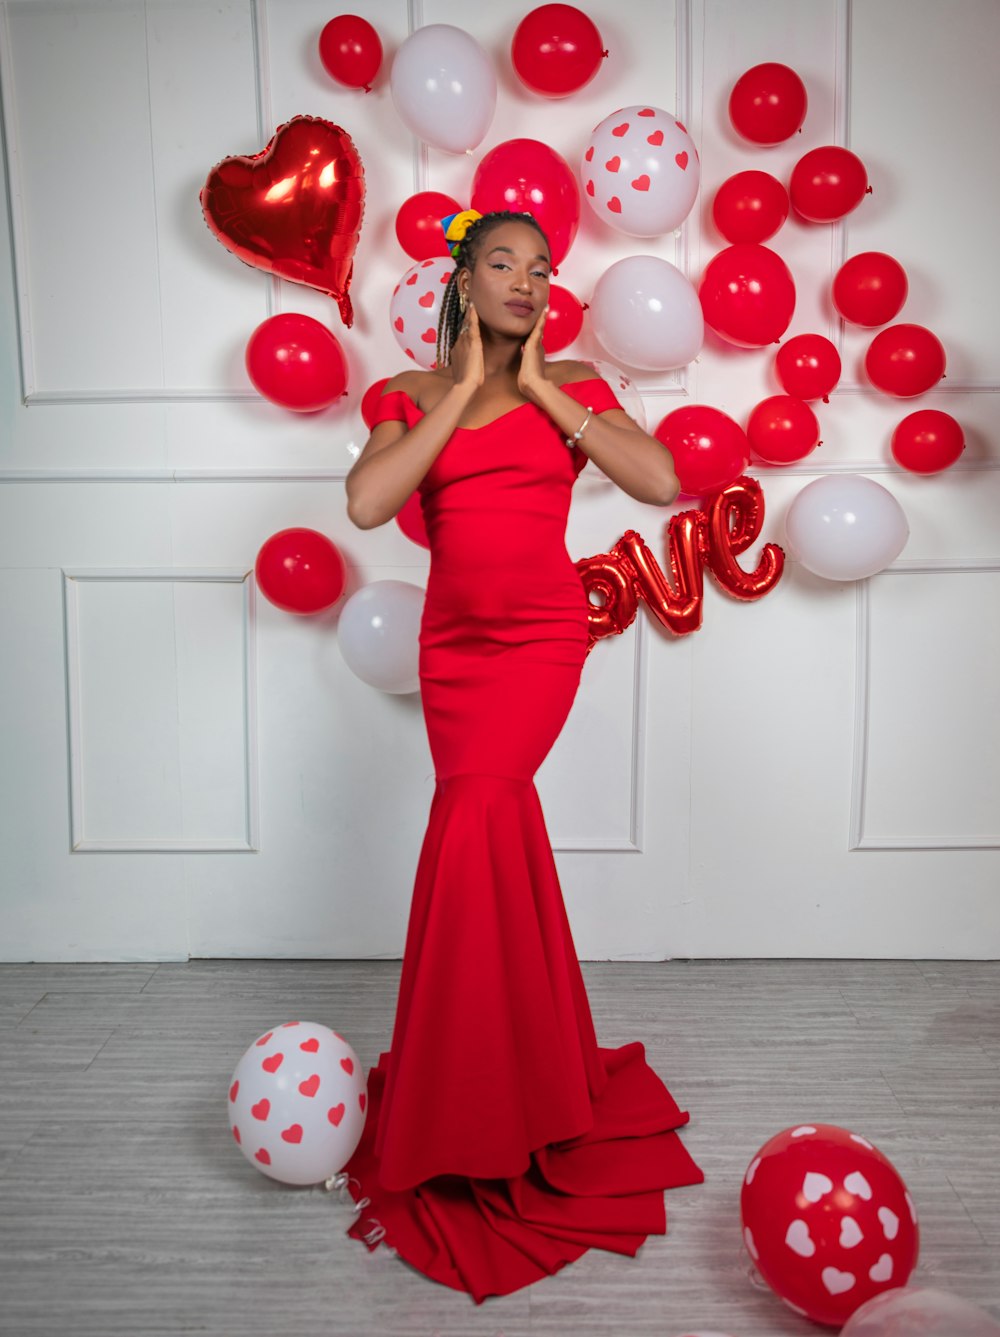 a woman in a red dress standing in front of balloons